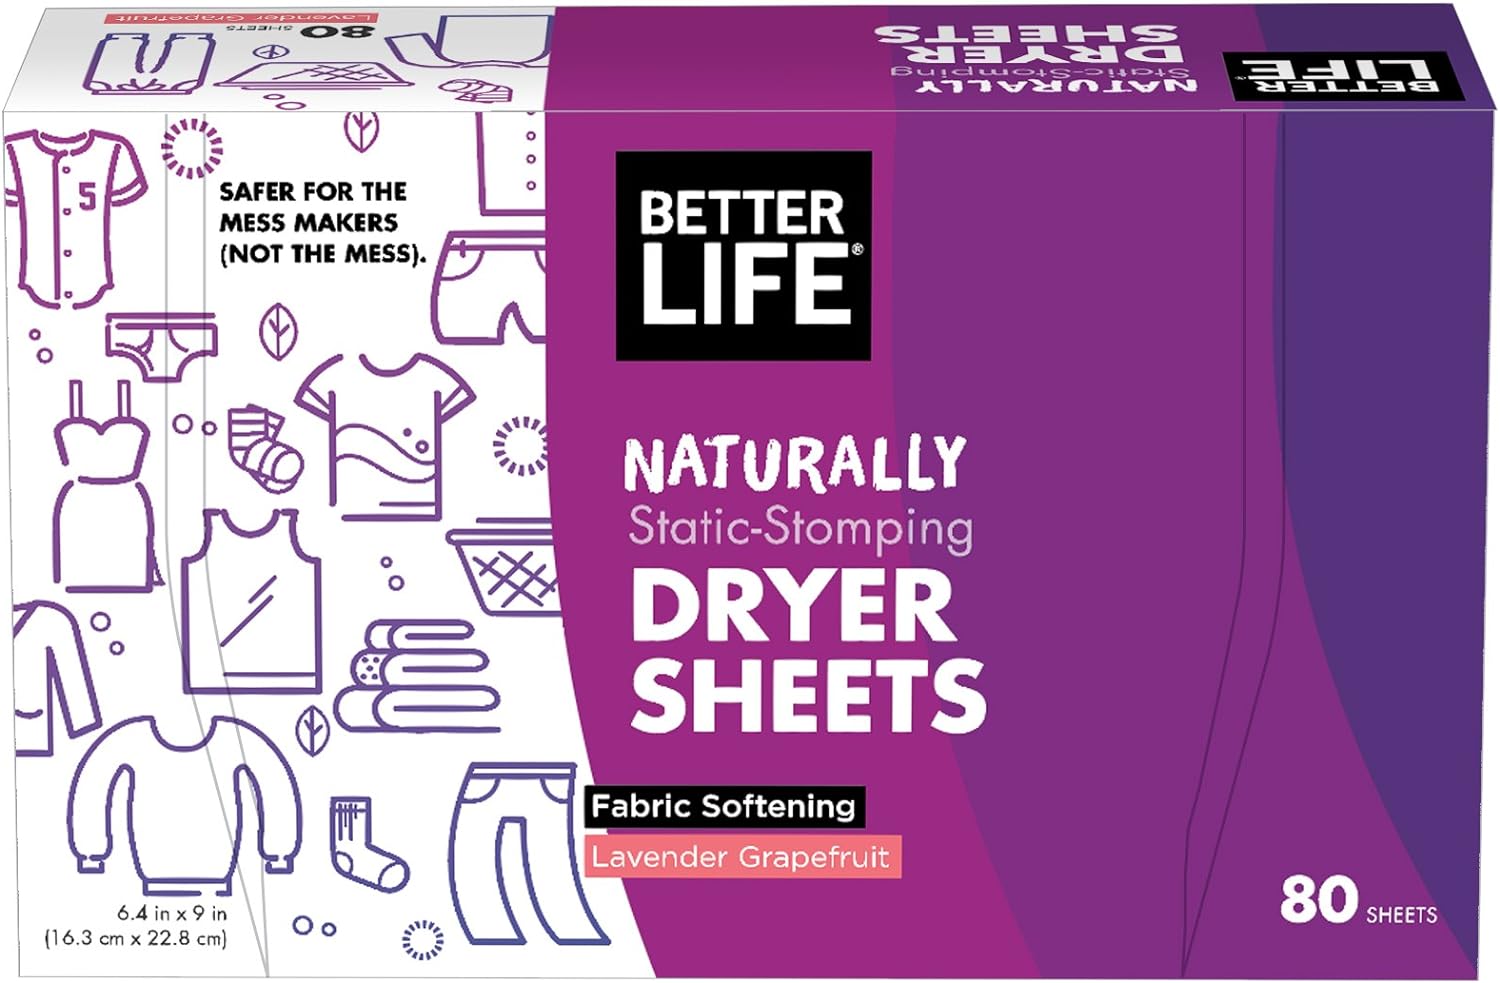 I have been buying these dryer sheets for many years and love them! I am happy to see that they are sold on Amazon too. They are lightly scented but do not leave your clothing smelling anything but clean! They are kind of crunchy rather than soft but this does not bother me. I am happy to be able to purchase natural dryer sheets for my family's clothes.